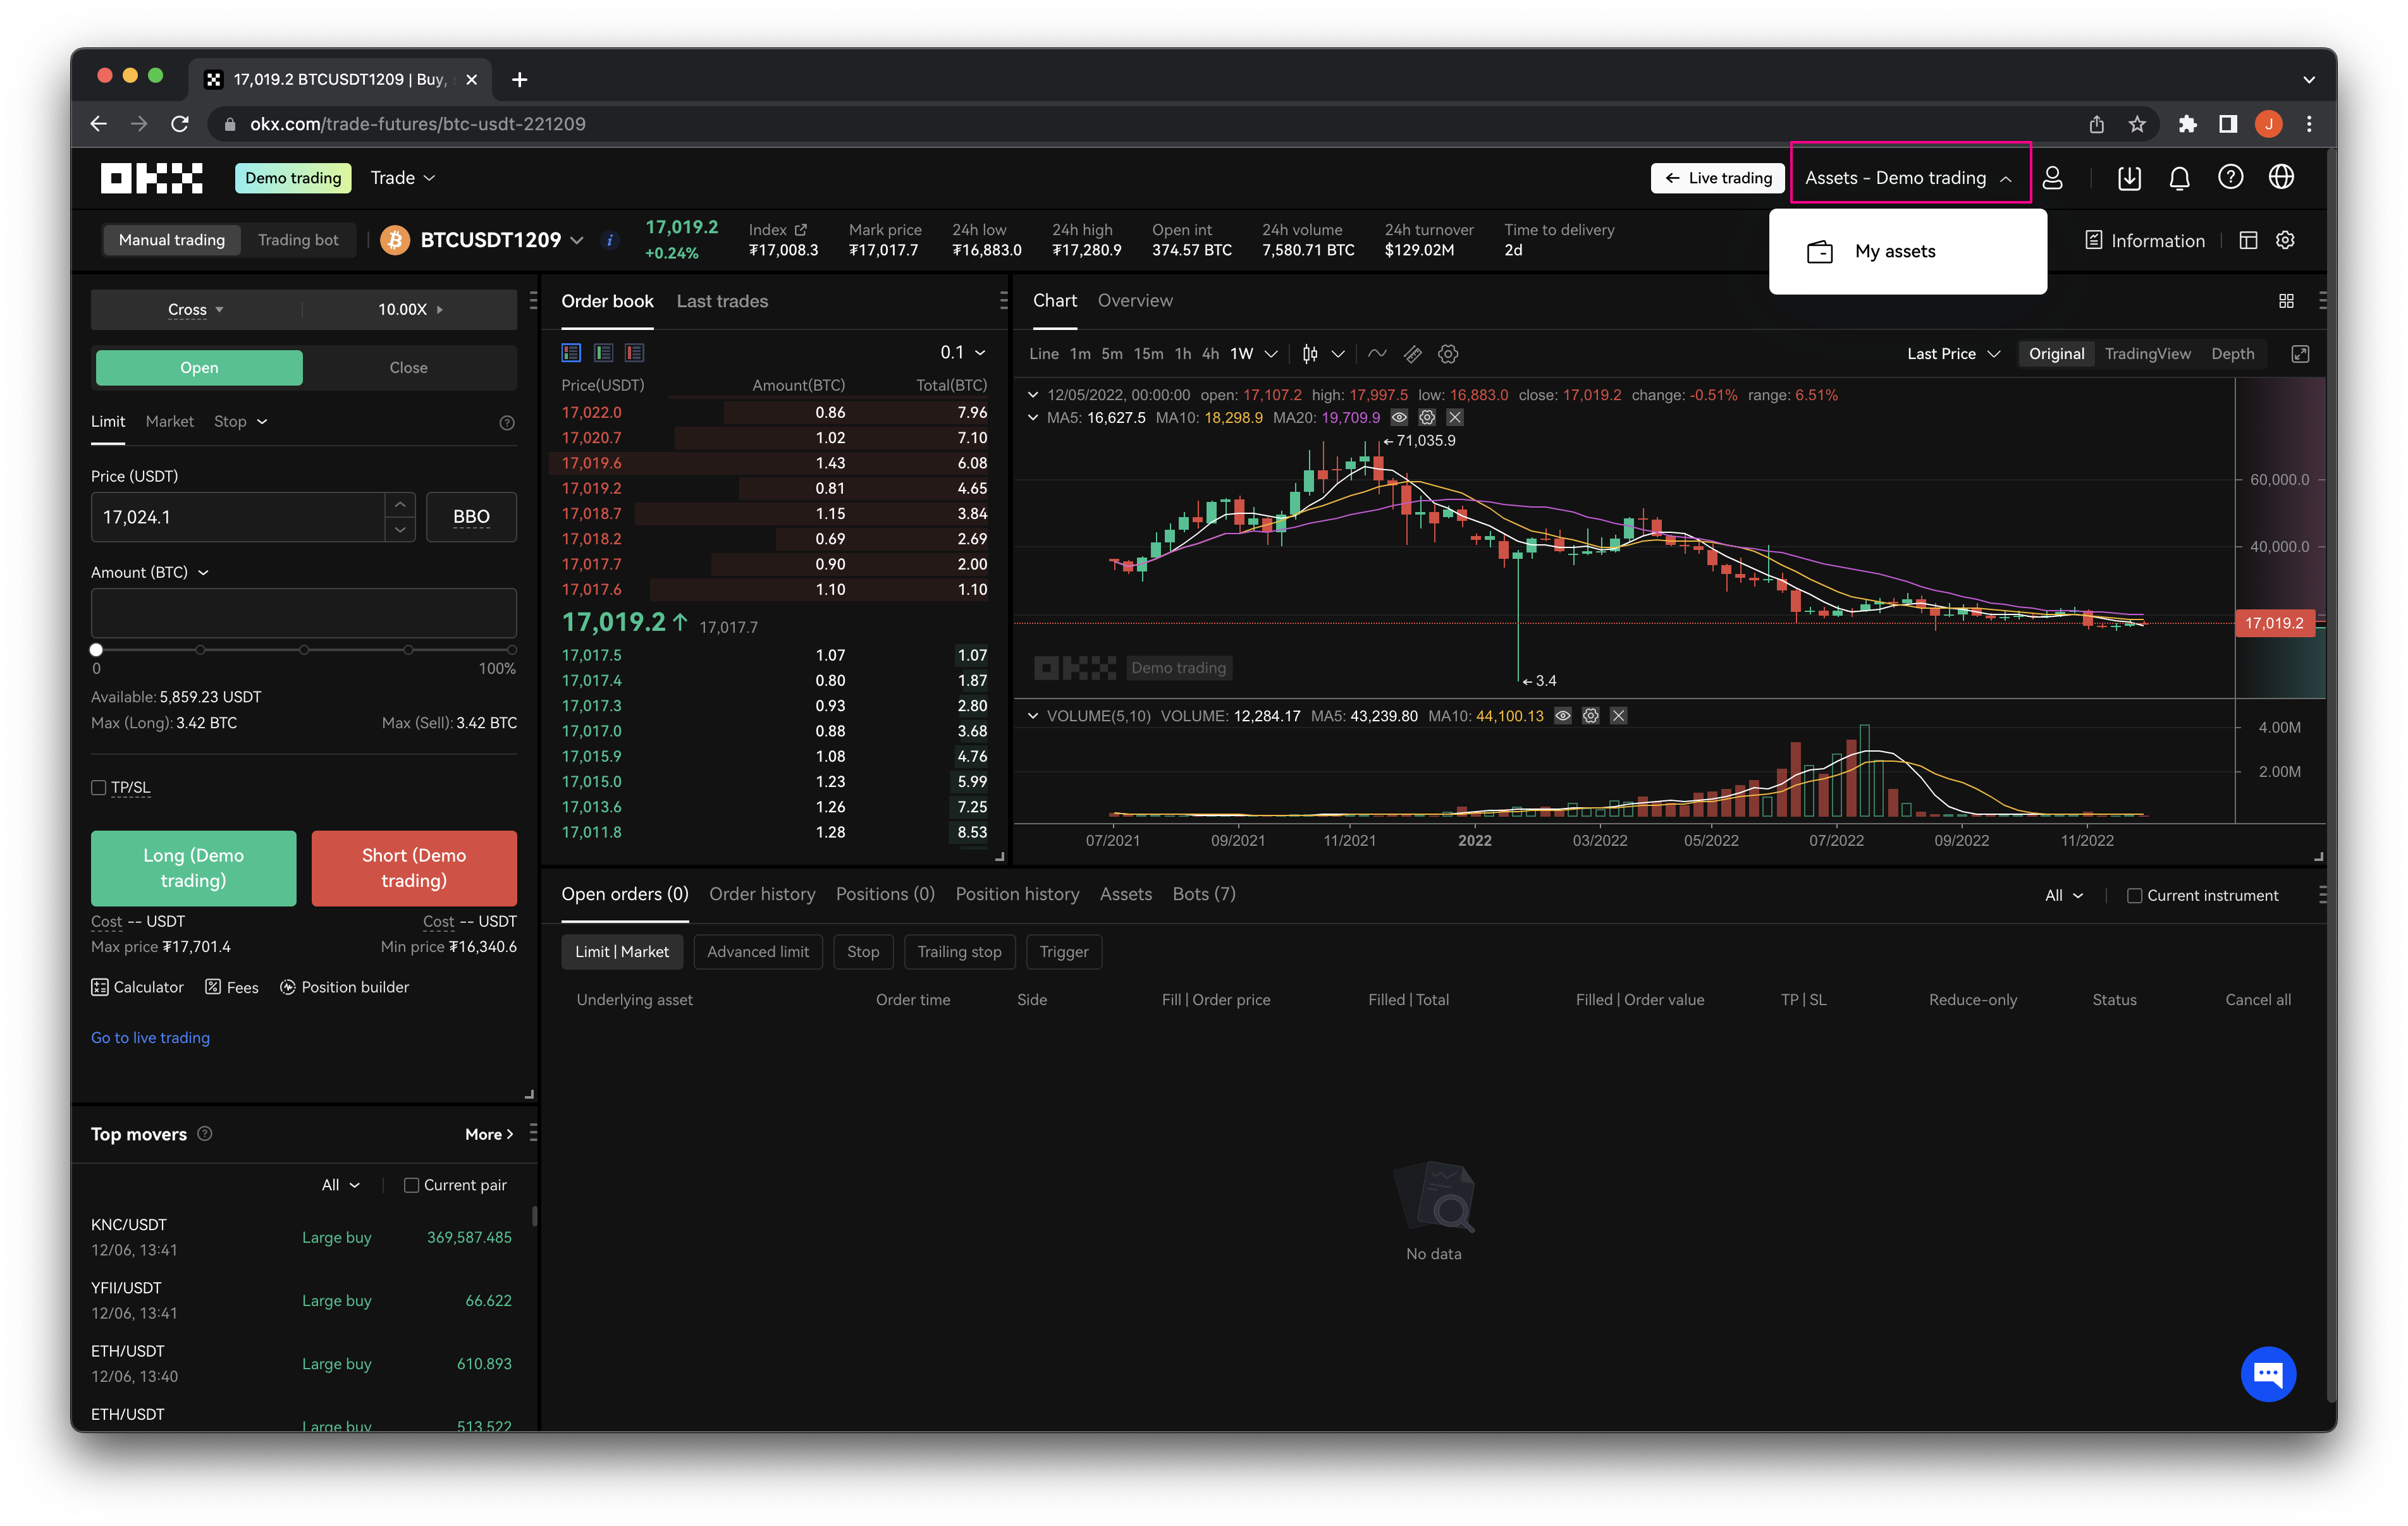 Access demo trading assets